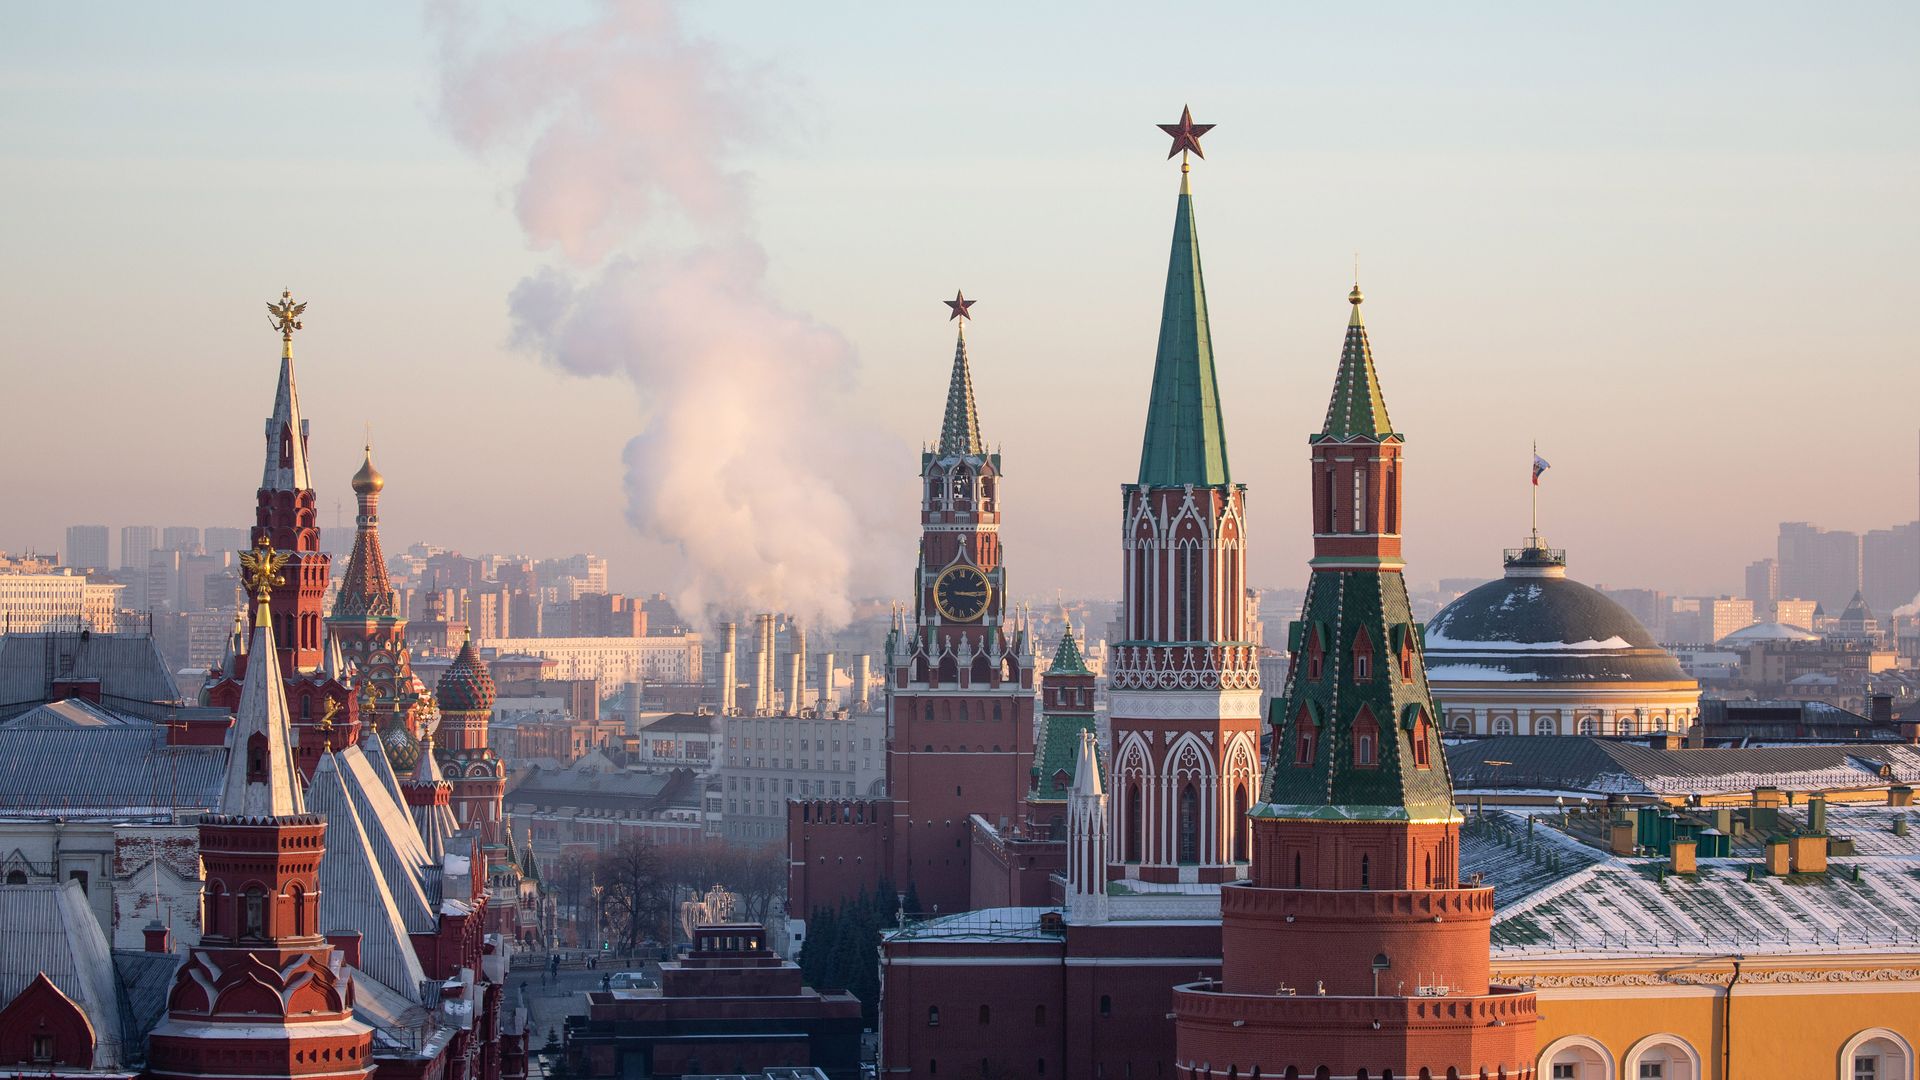 The Kremlin, viewed from the roof of the Ritz-Carlton hotel, in Moscow, Russia.